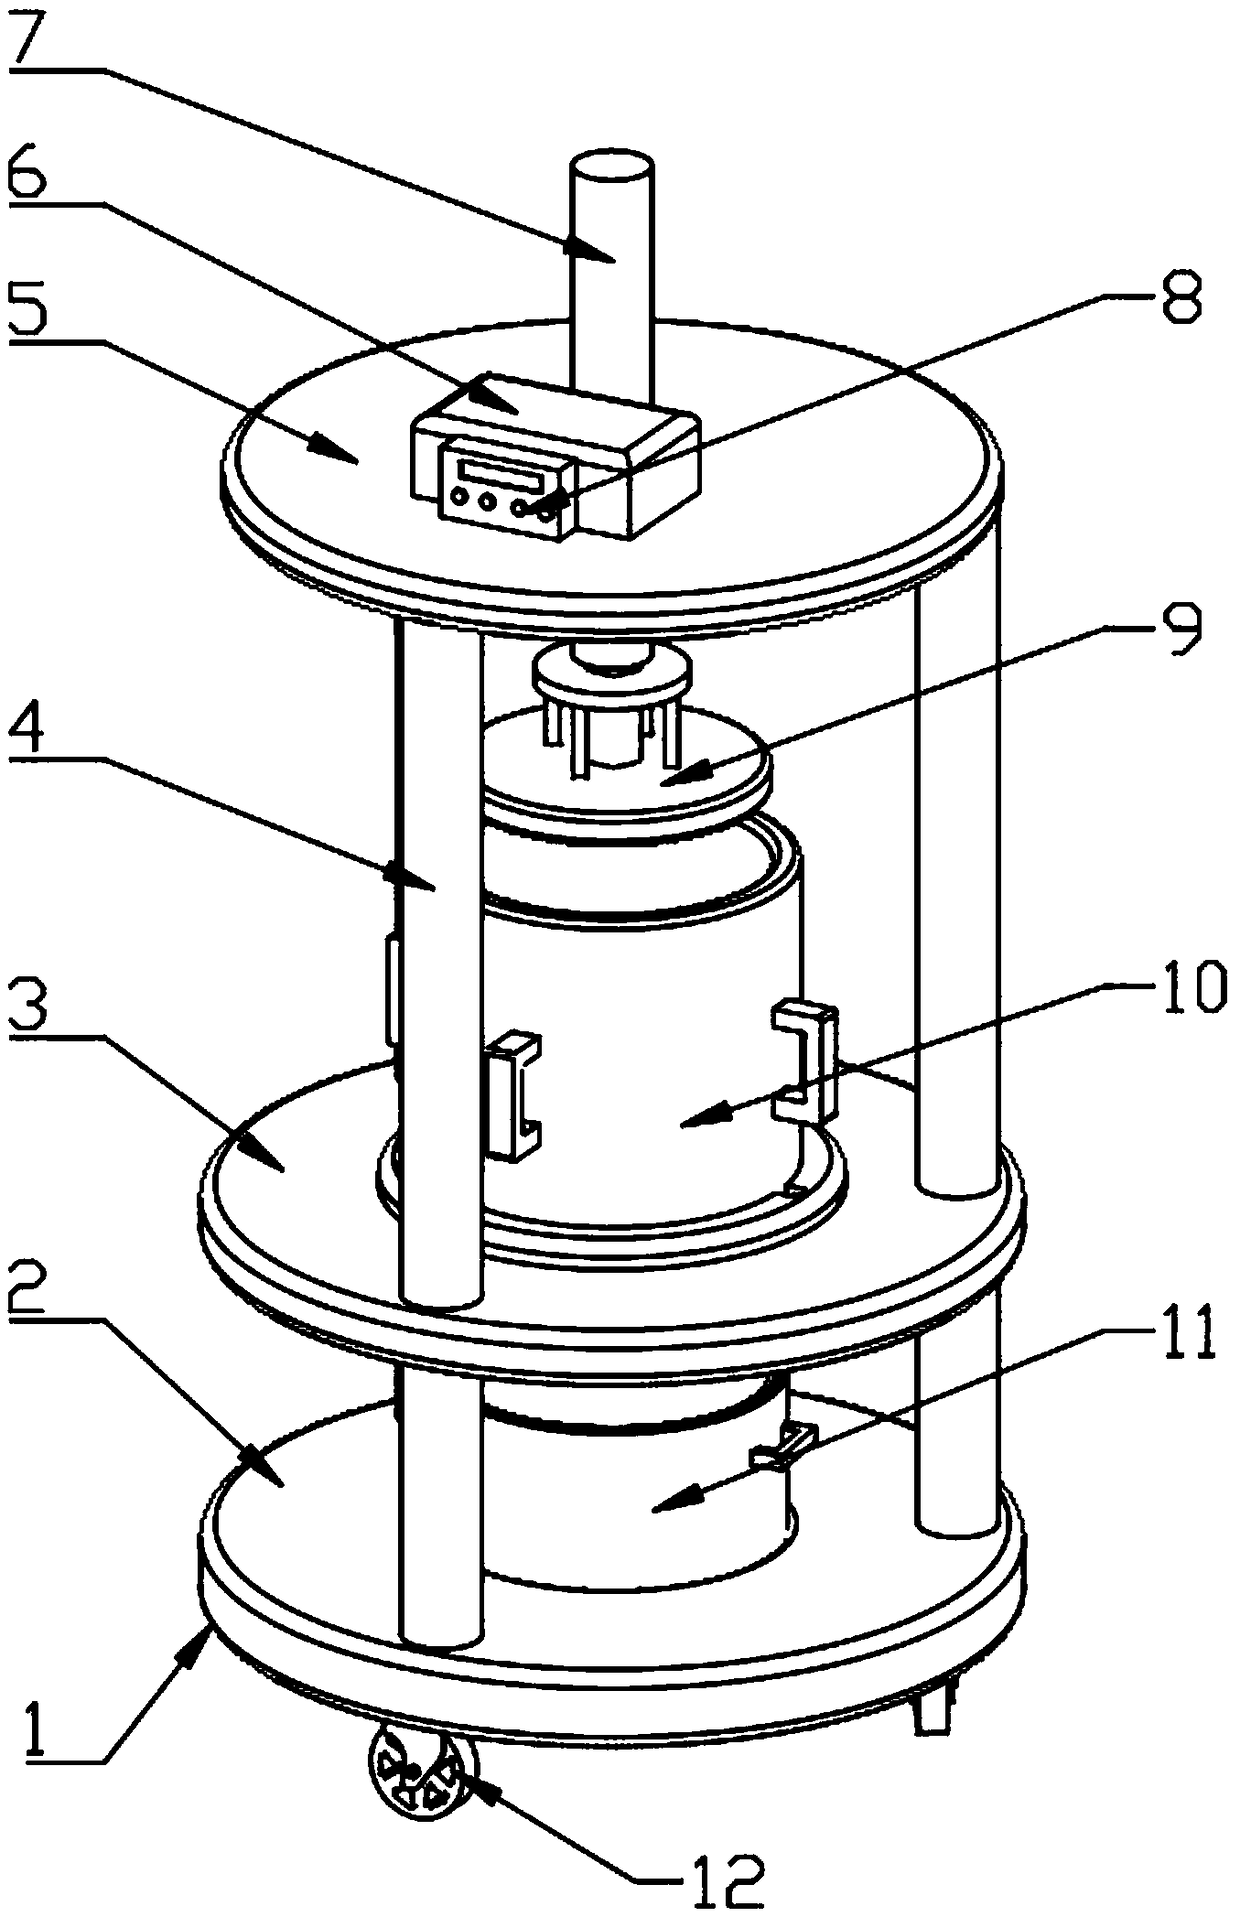 Basket pressing device for food processing